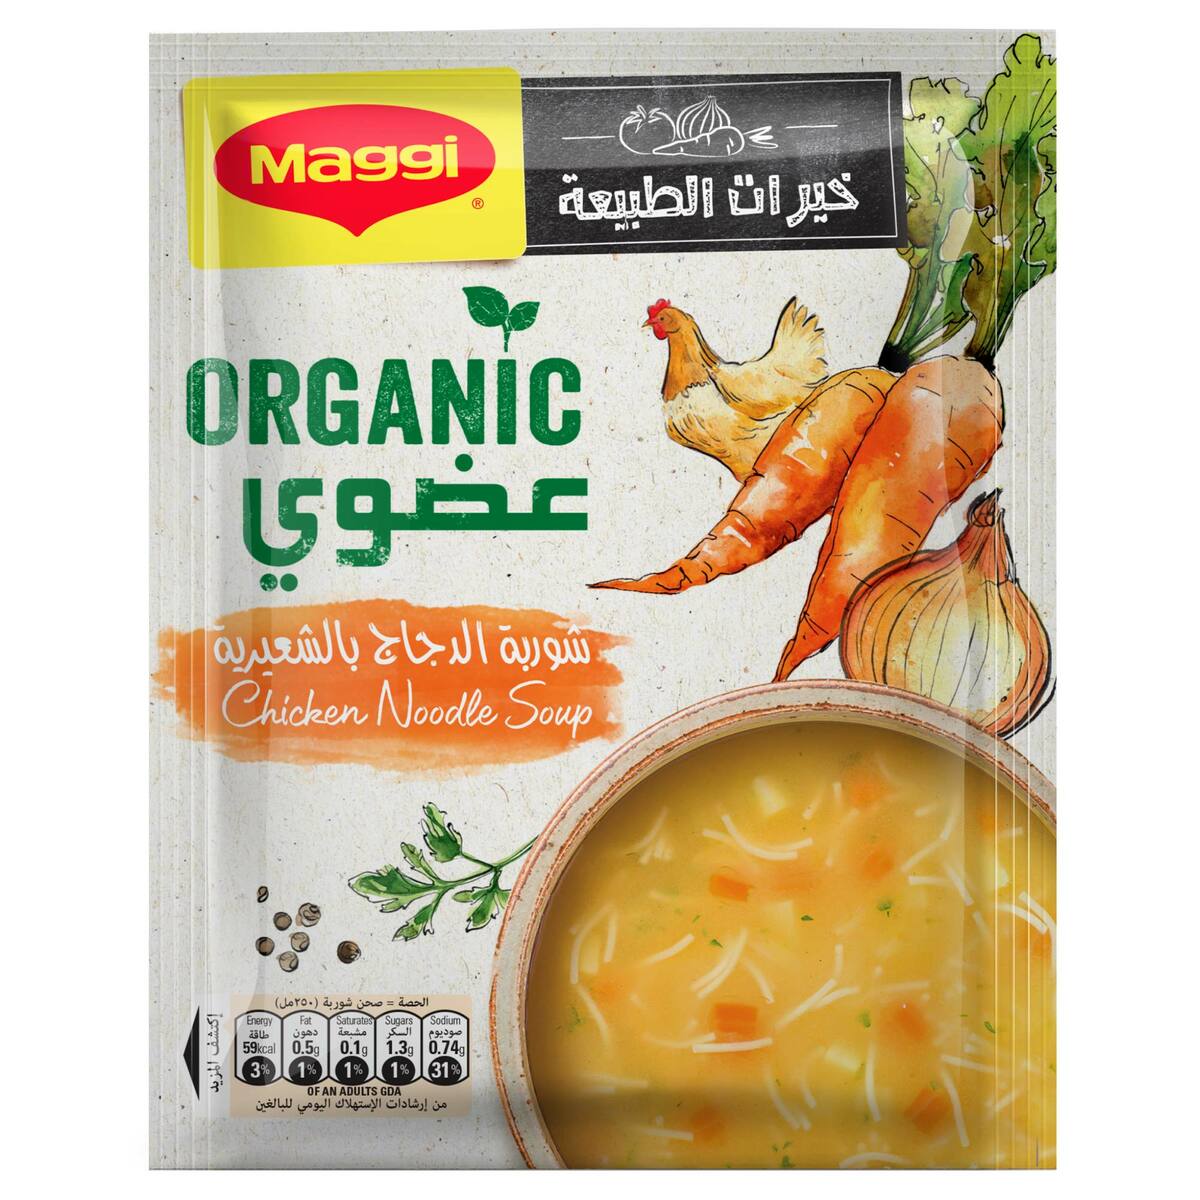 Maggi Organic Chicken Noodle Soup 55 g